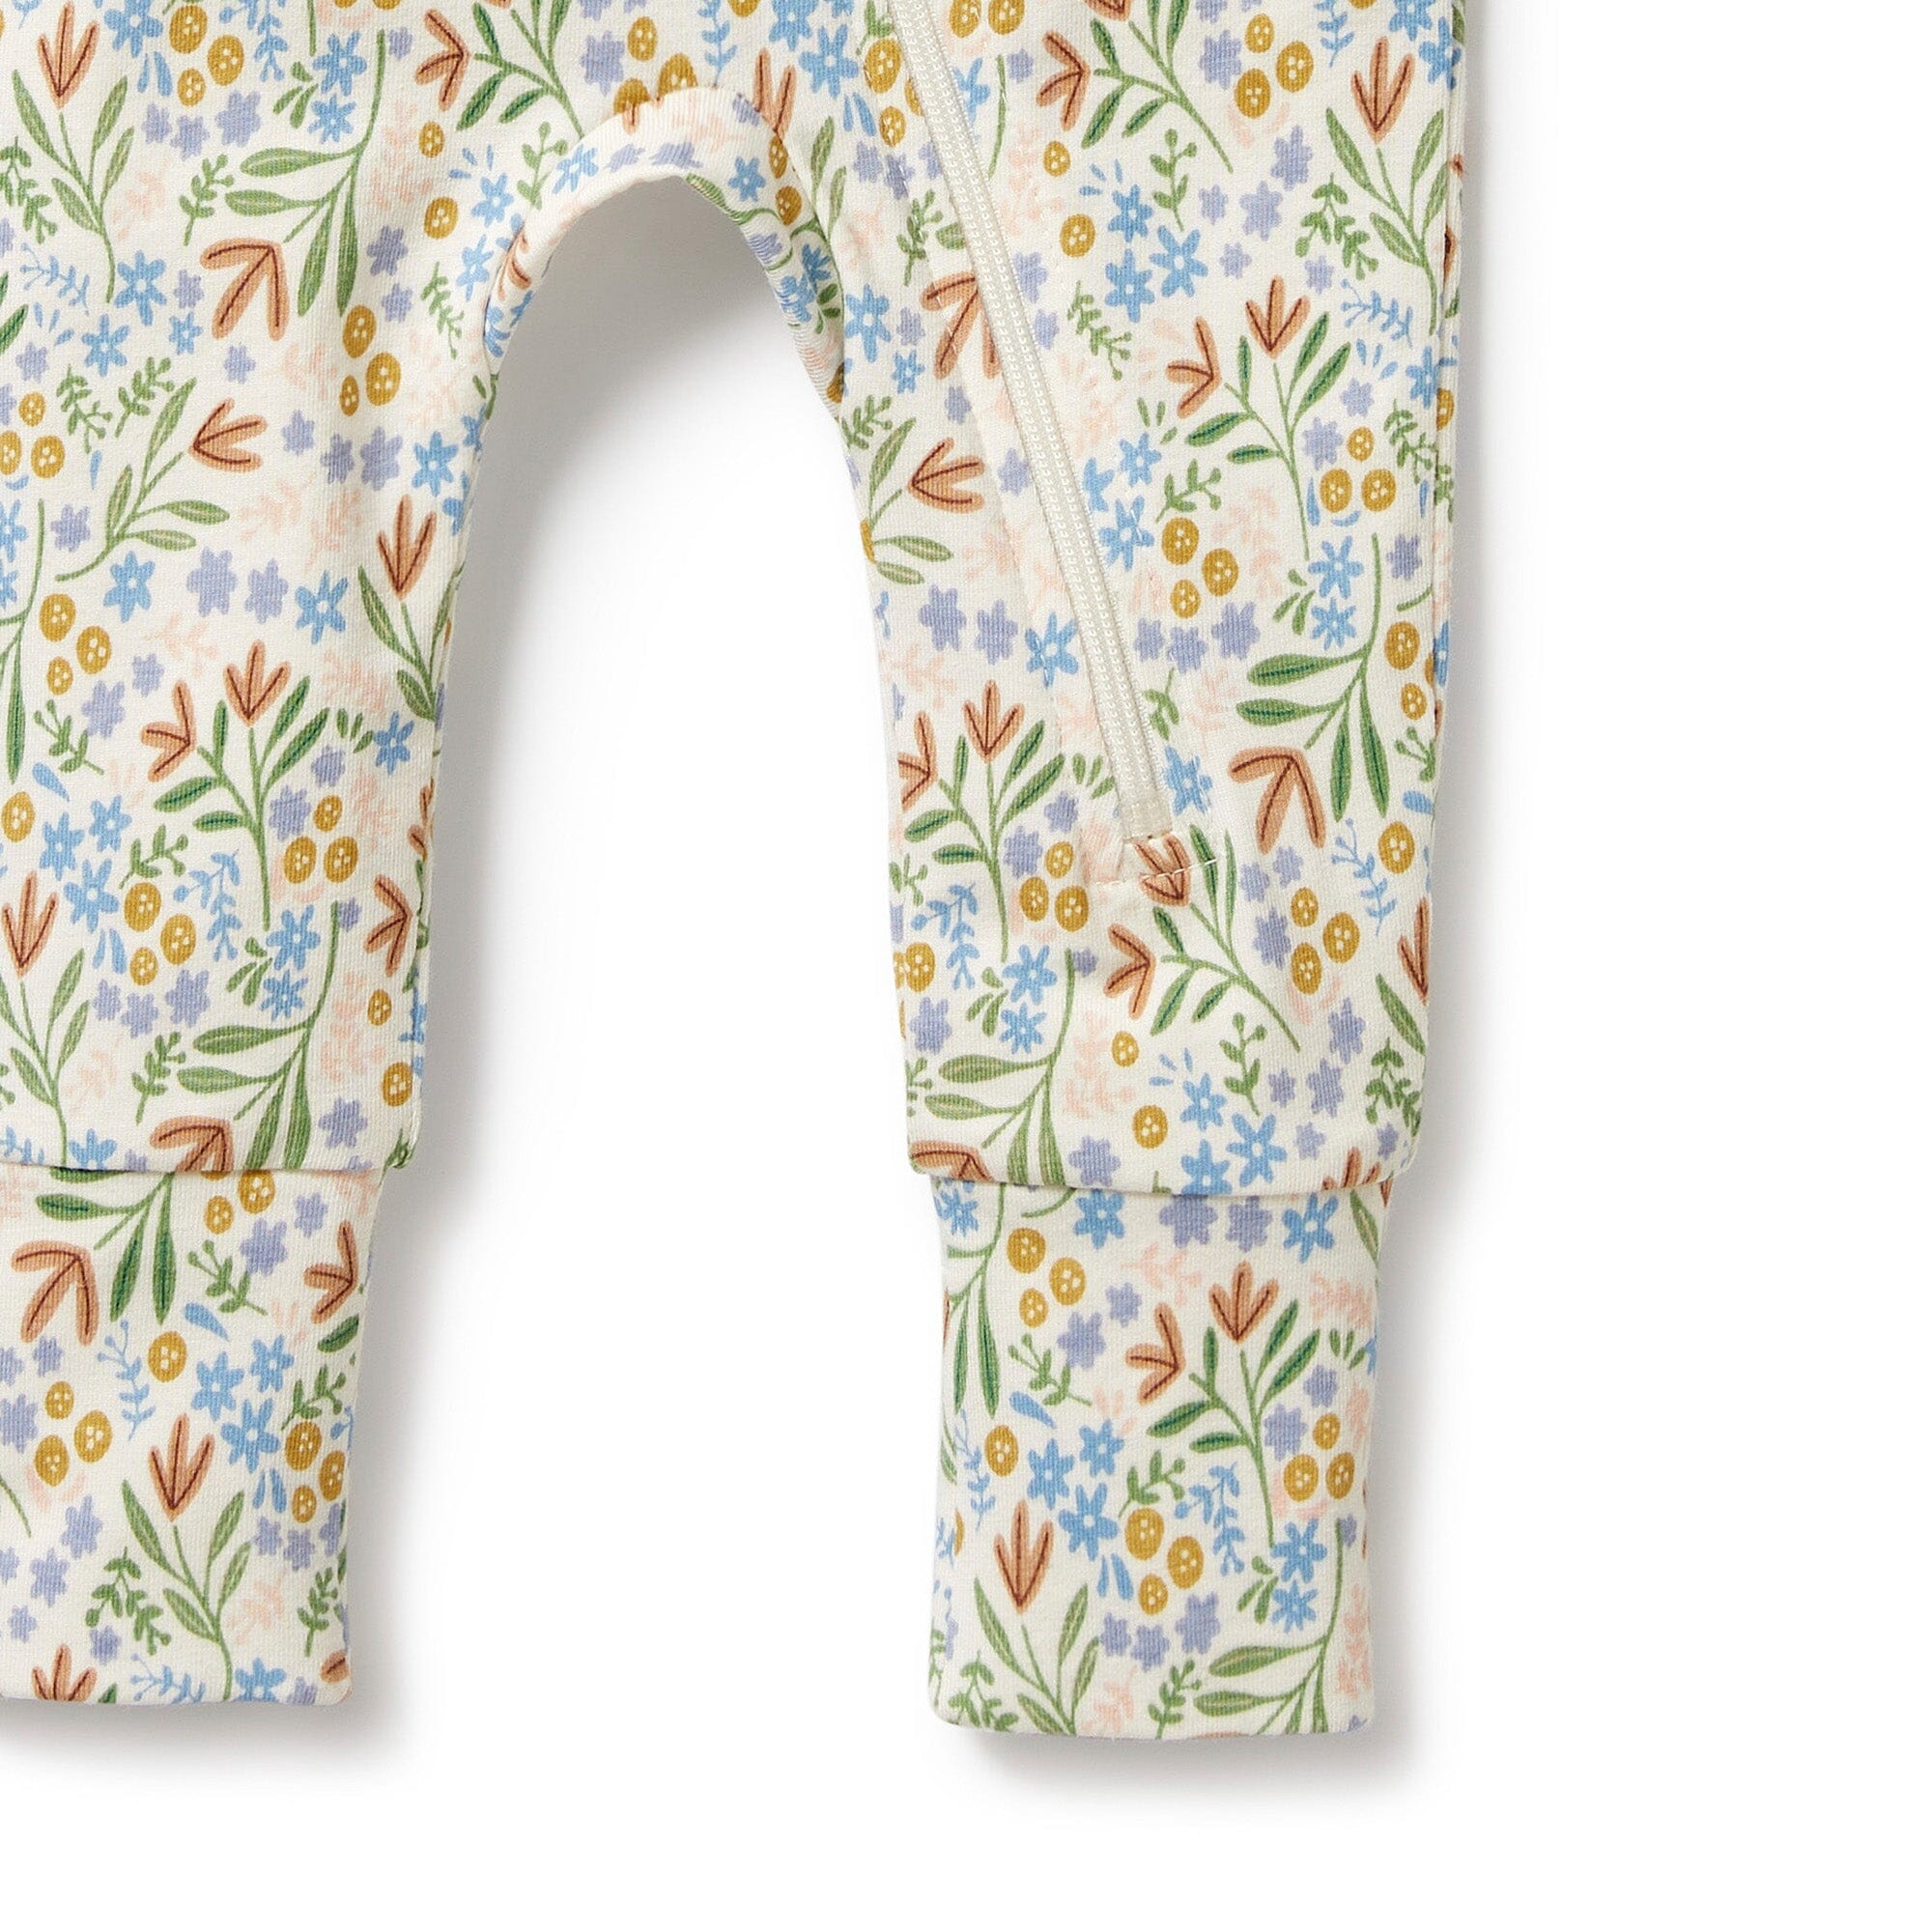 Wilson & Frenchy - Organic Zipsuit with Feet - Tinker Floral Baby Wilson & Frenchy